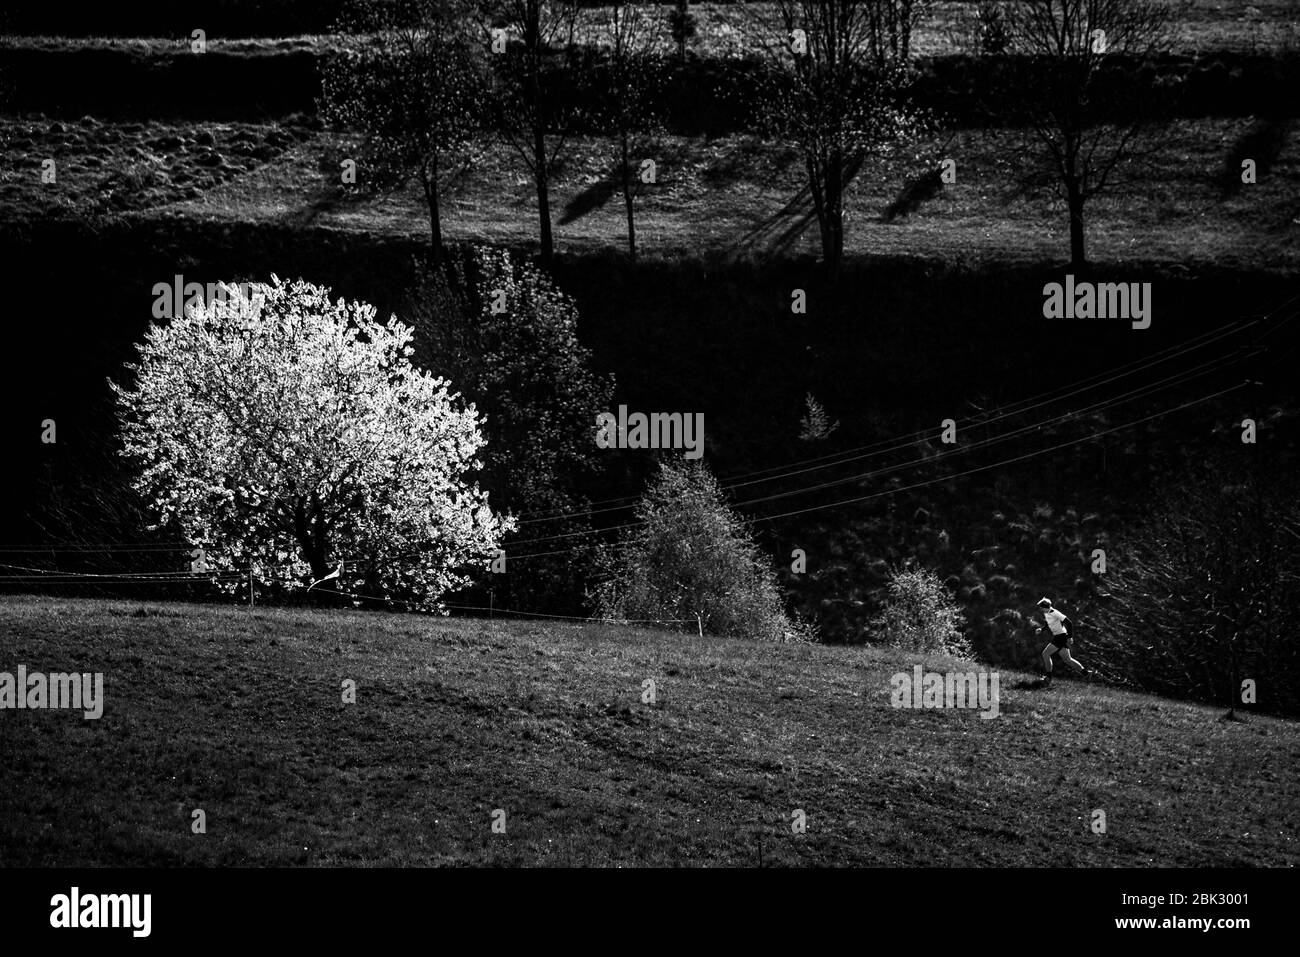 Athlete running in spring landscape near by blossom cherry tree. Black and white photo. Stock Photo